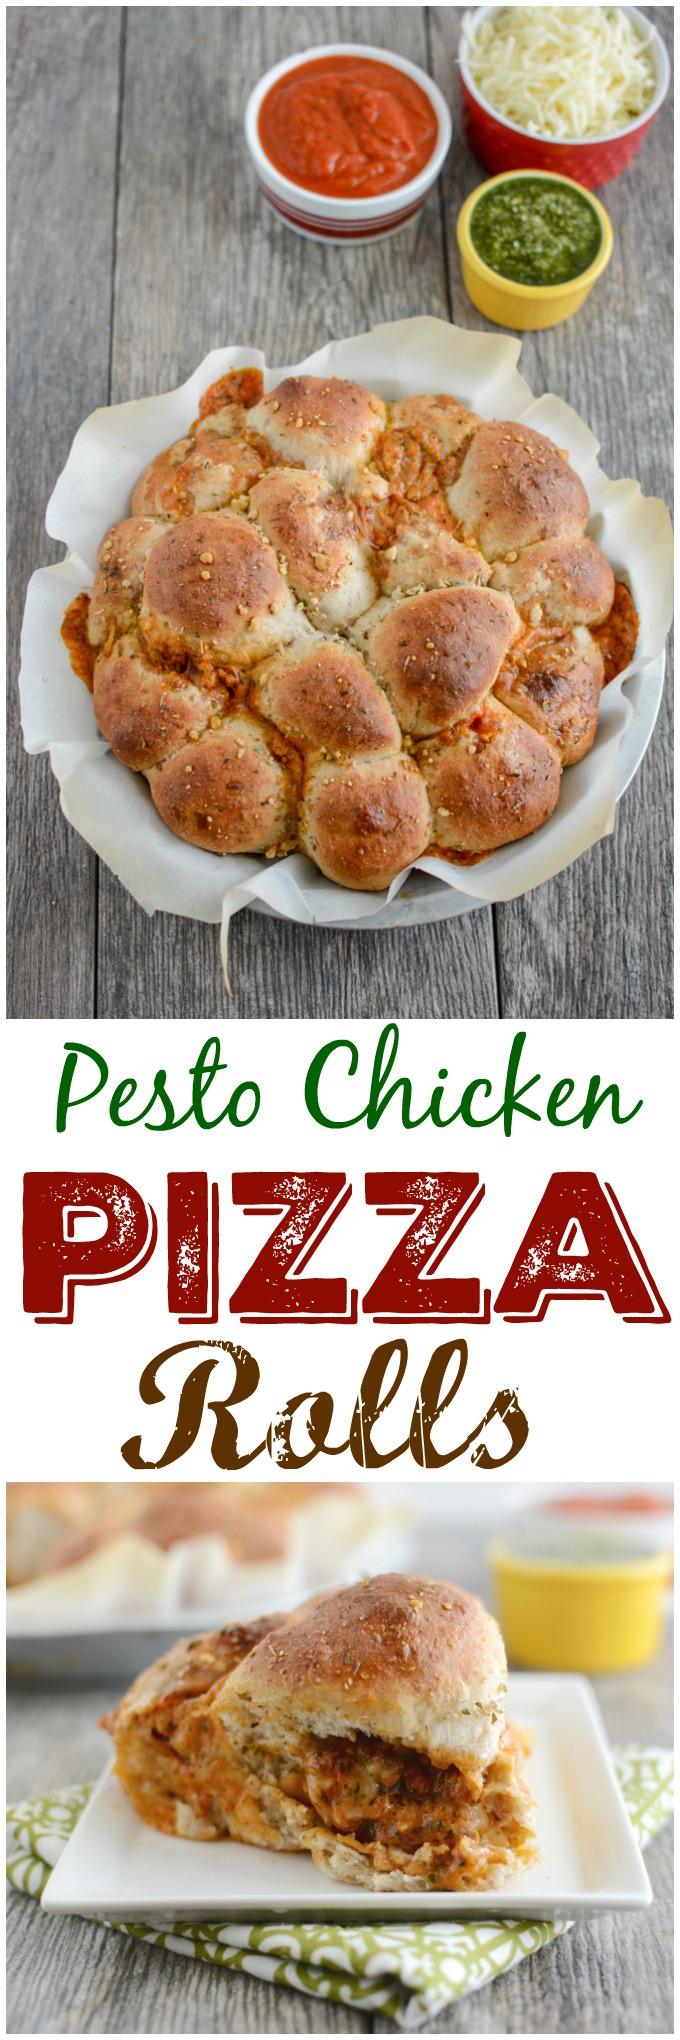 This recipe for Pesto Chicken Pizza Rolls is a fun way to change things up from traditional pizza. Serve them warm or cold for lunch or for an easy appetizer. They're easy to make and kid-friendly as well!